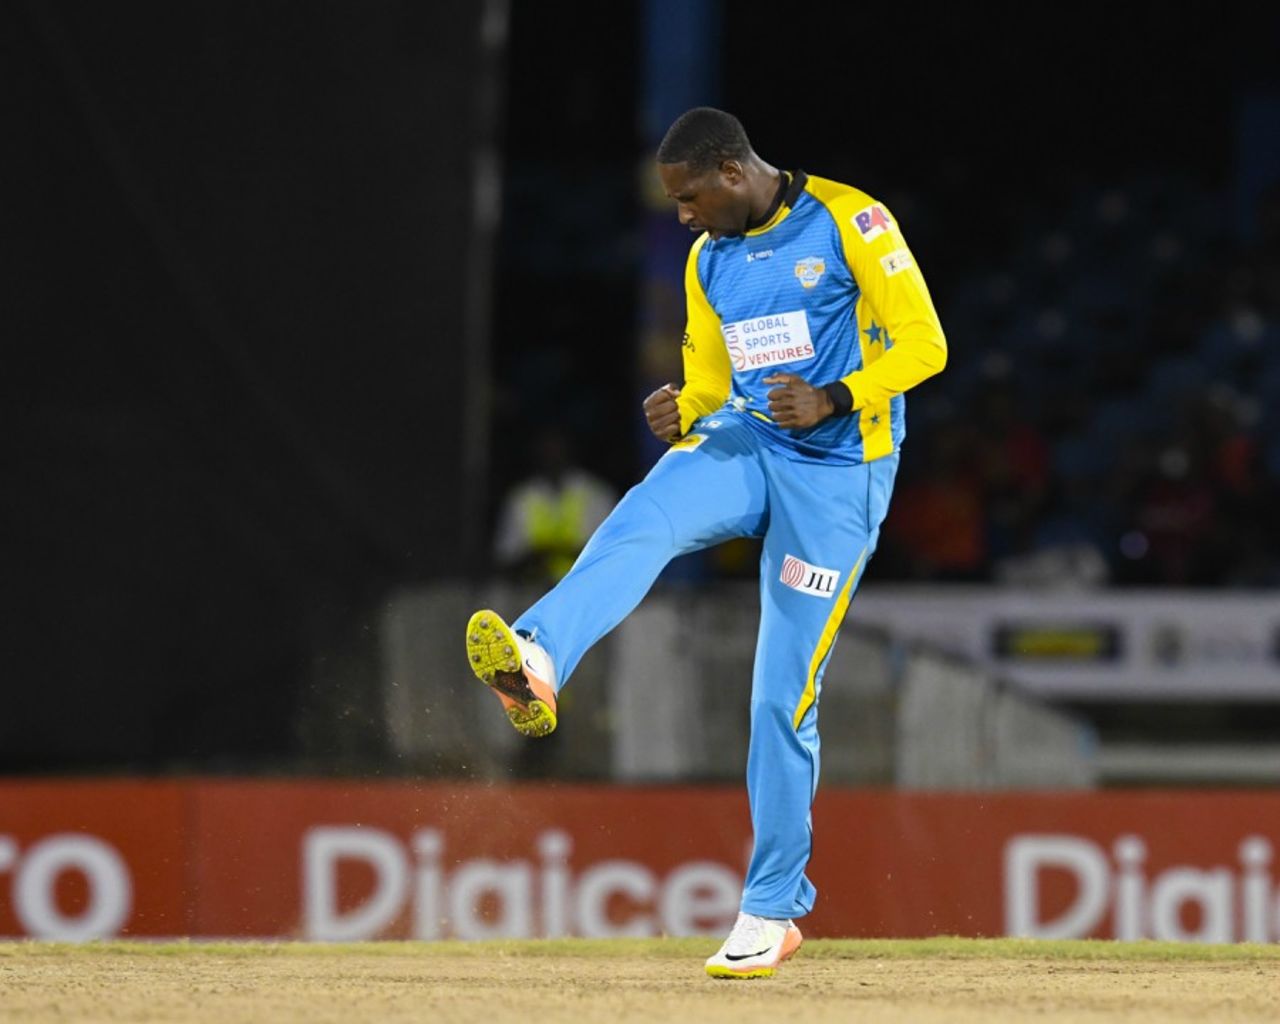 Shane Shillingford finished with 4 for 22, Trinbago Knight Riders v St Lucia Stars, Port-of-Spain, CPL, August 7, 2017